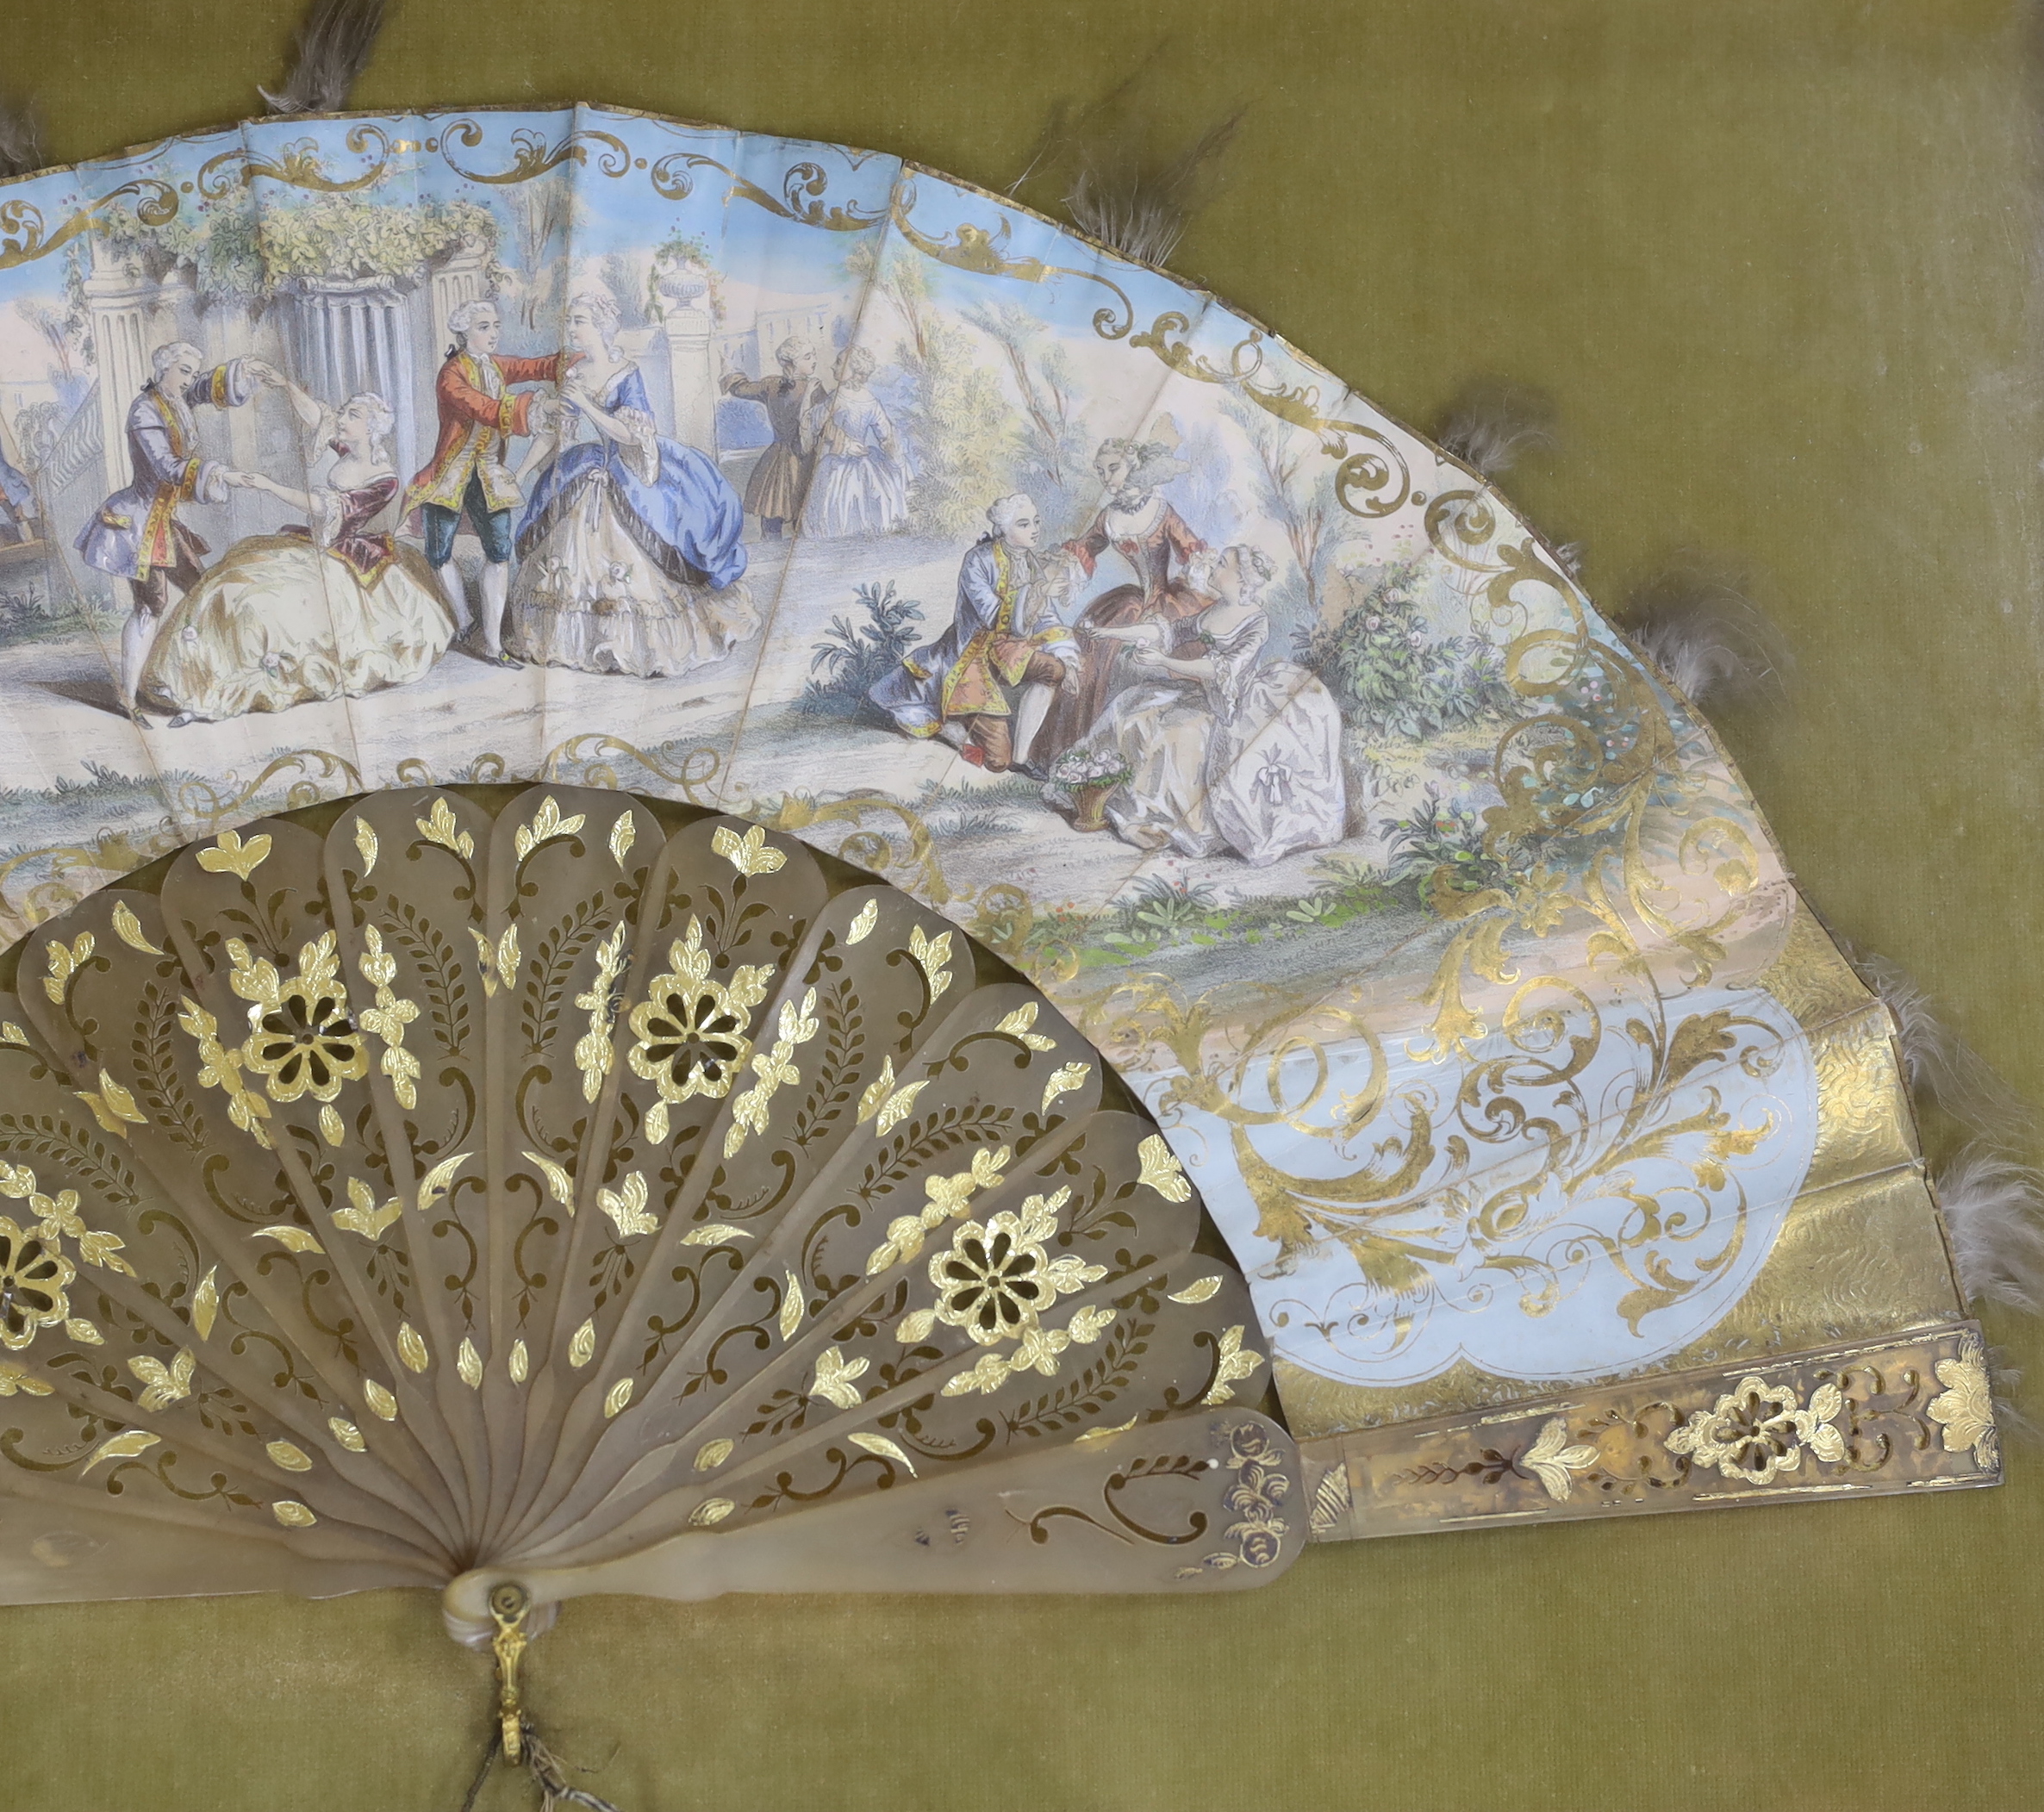 A 19th century fan, hand painted with figures wearing 18th century dress, framed, 57 x 37cm